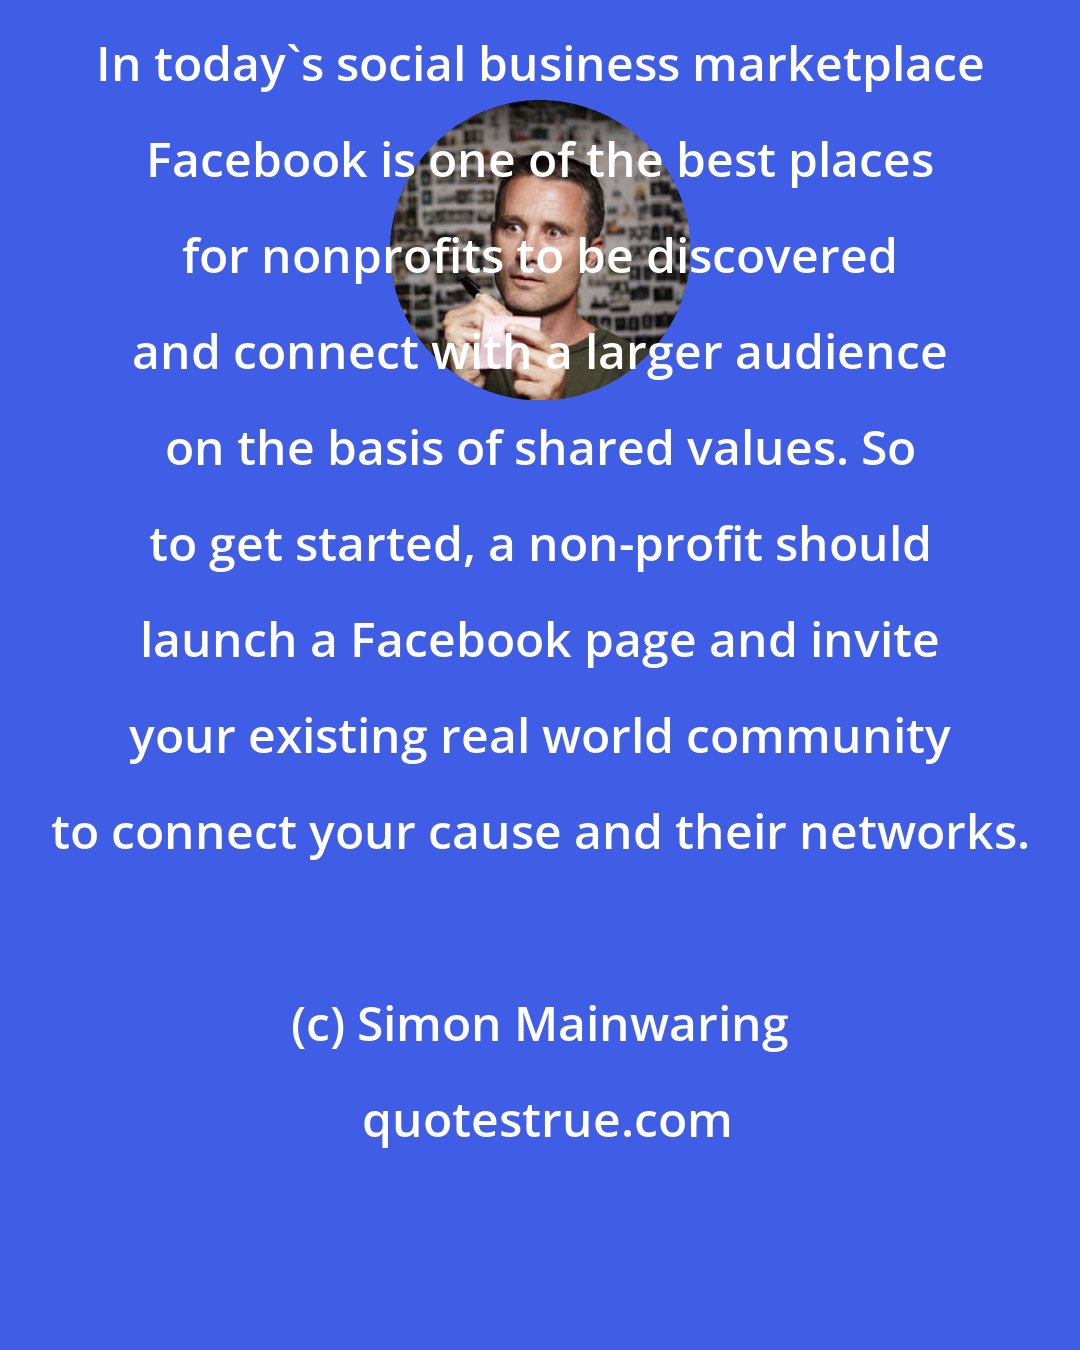 Simon Mainwaring: In today's social business marketplace Facebook is one of the best places for nonprofits to be discovered and connect with a larger audience on the basis of shared values. So to get started, a non-profit should launch a Facebook page and invite your existing real world community to connect your cause and their networks.